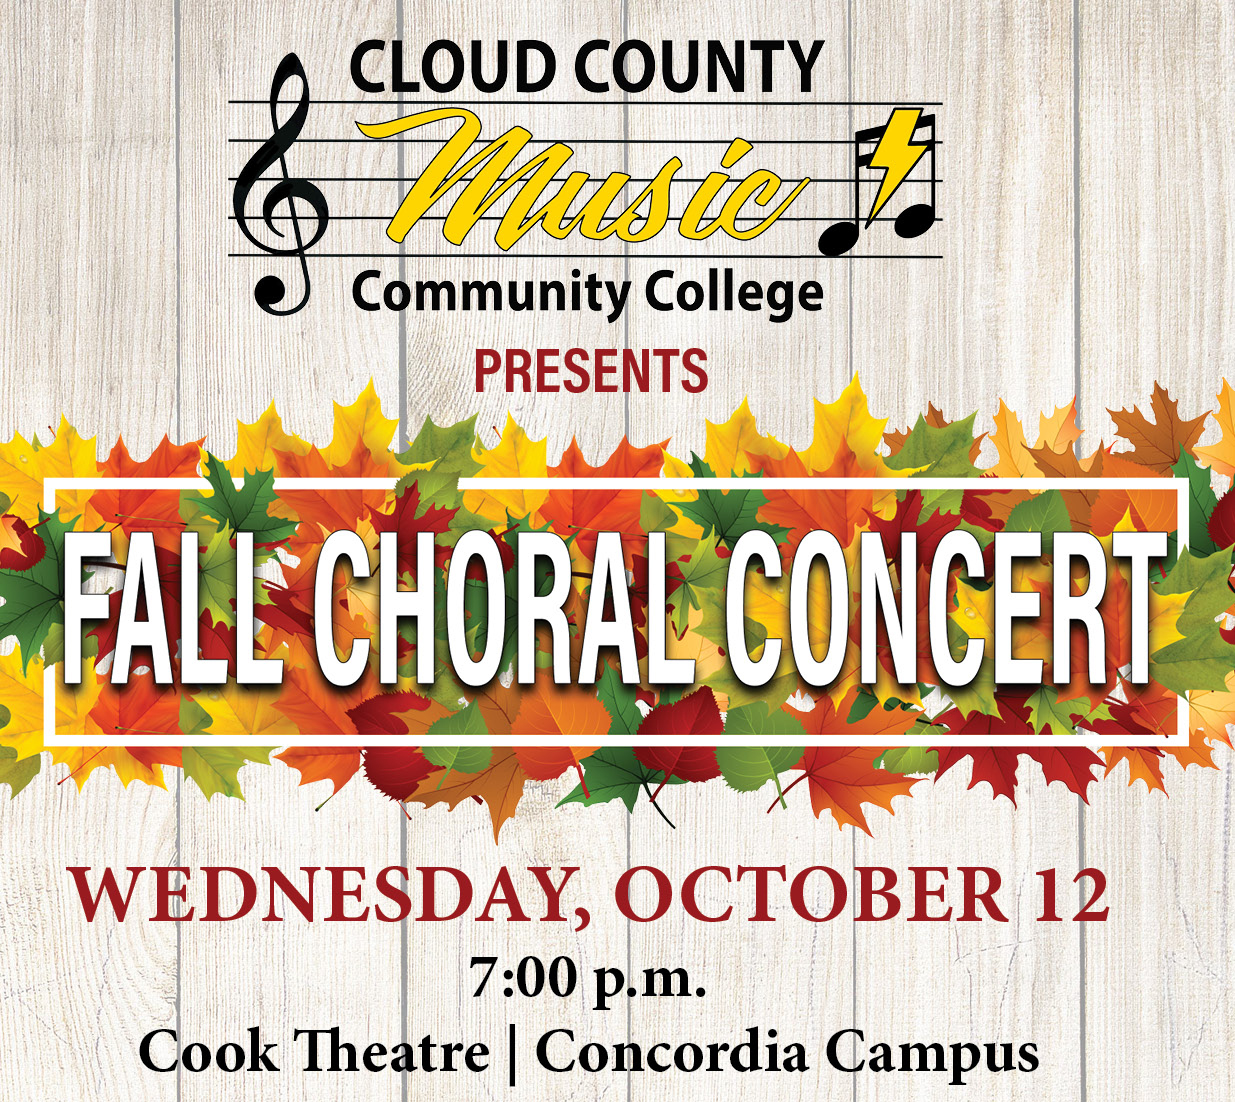 The 2022 Fall Choral Concert is October 12.